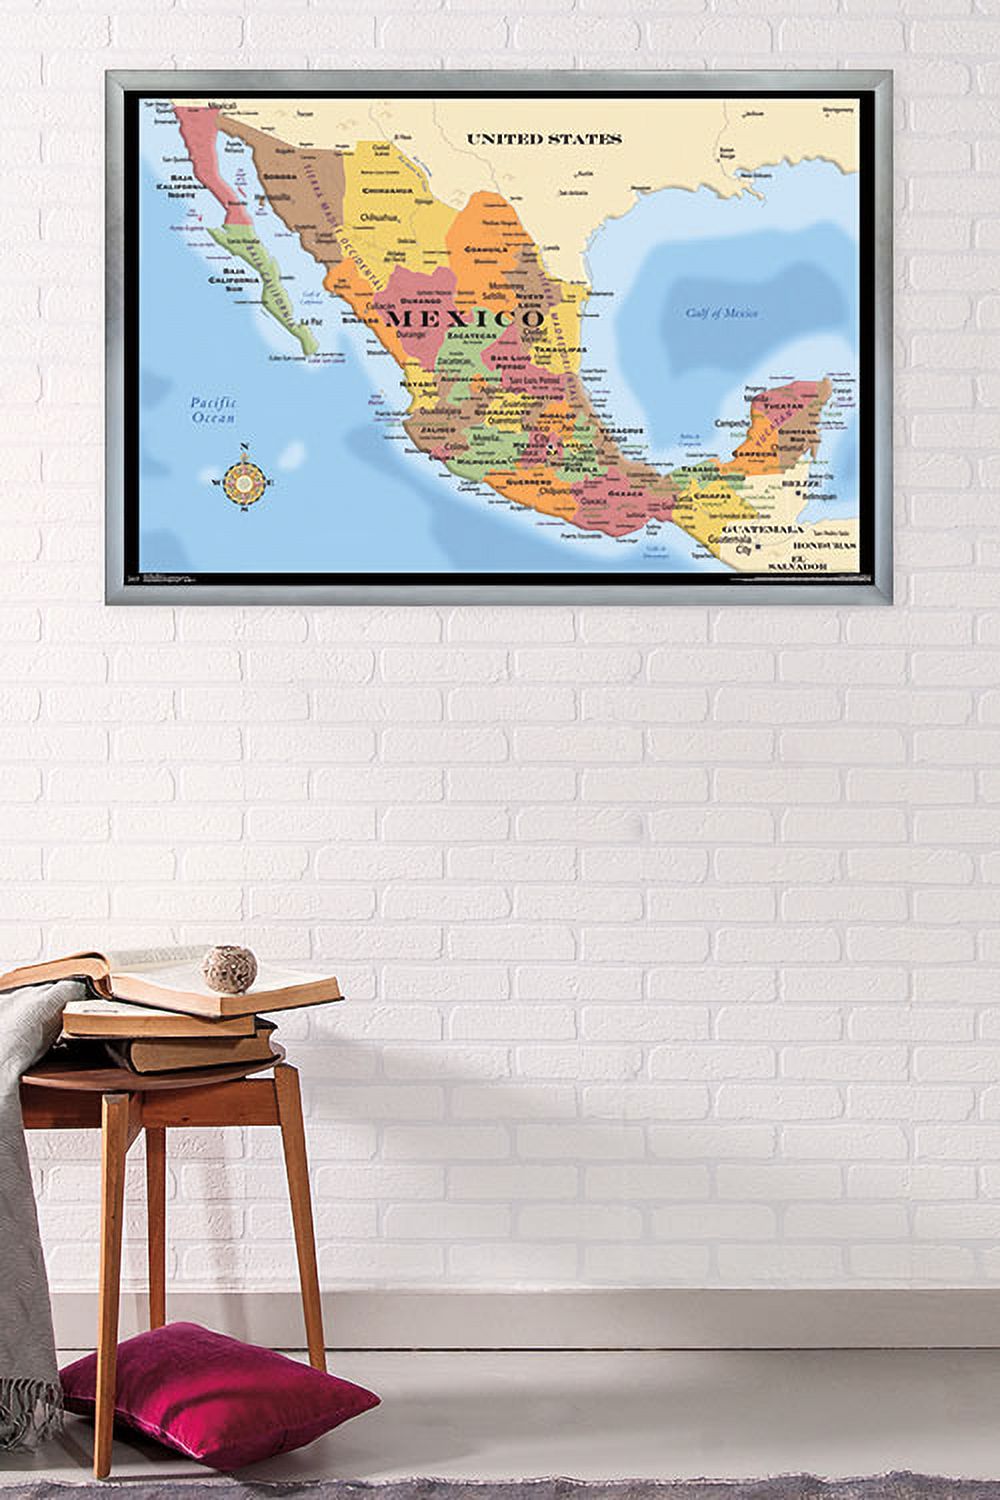 Map - Mexico Wall Poster, 22.375" x 34", Framed - image 2 of 2